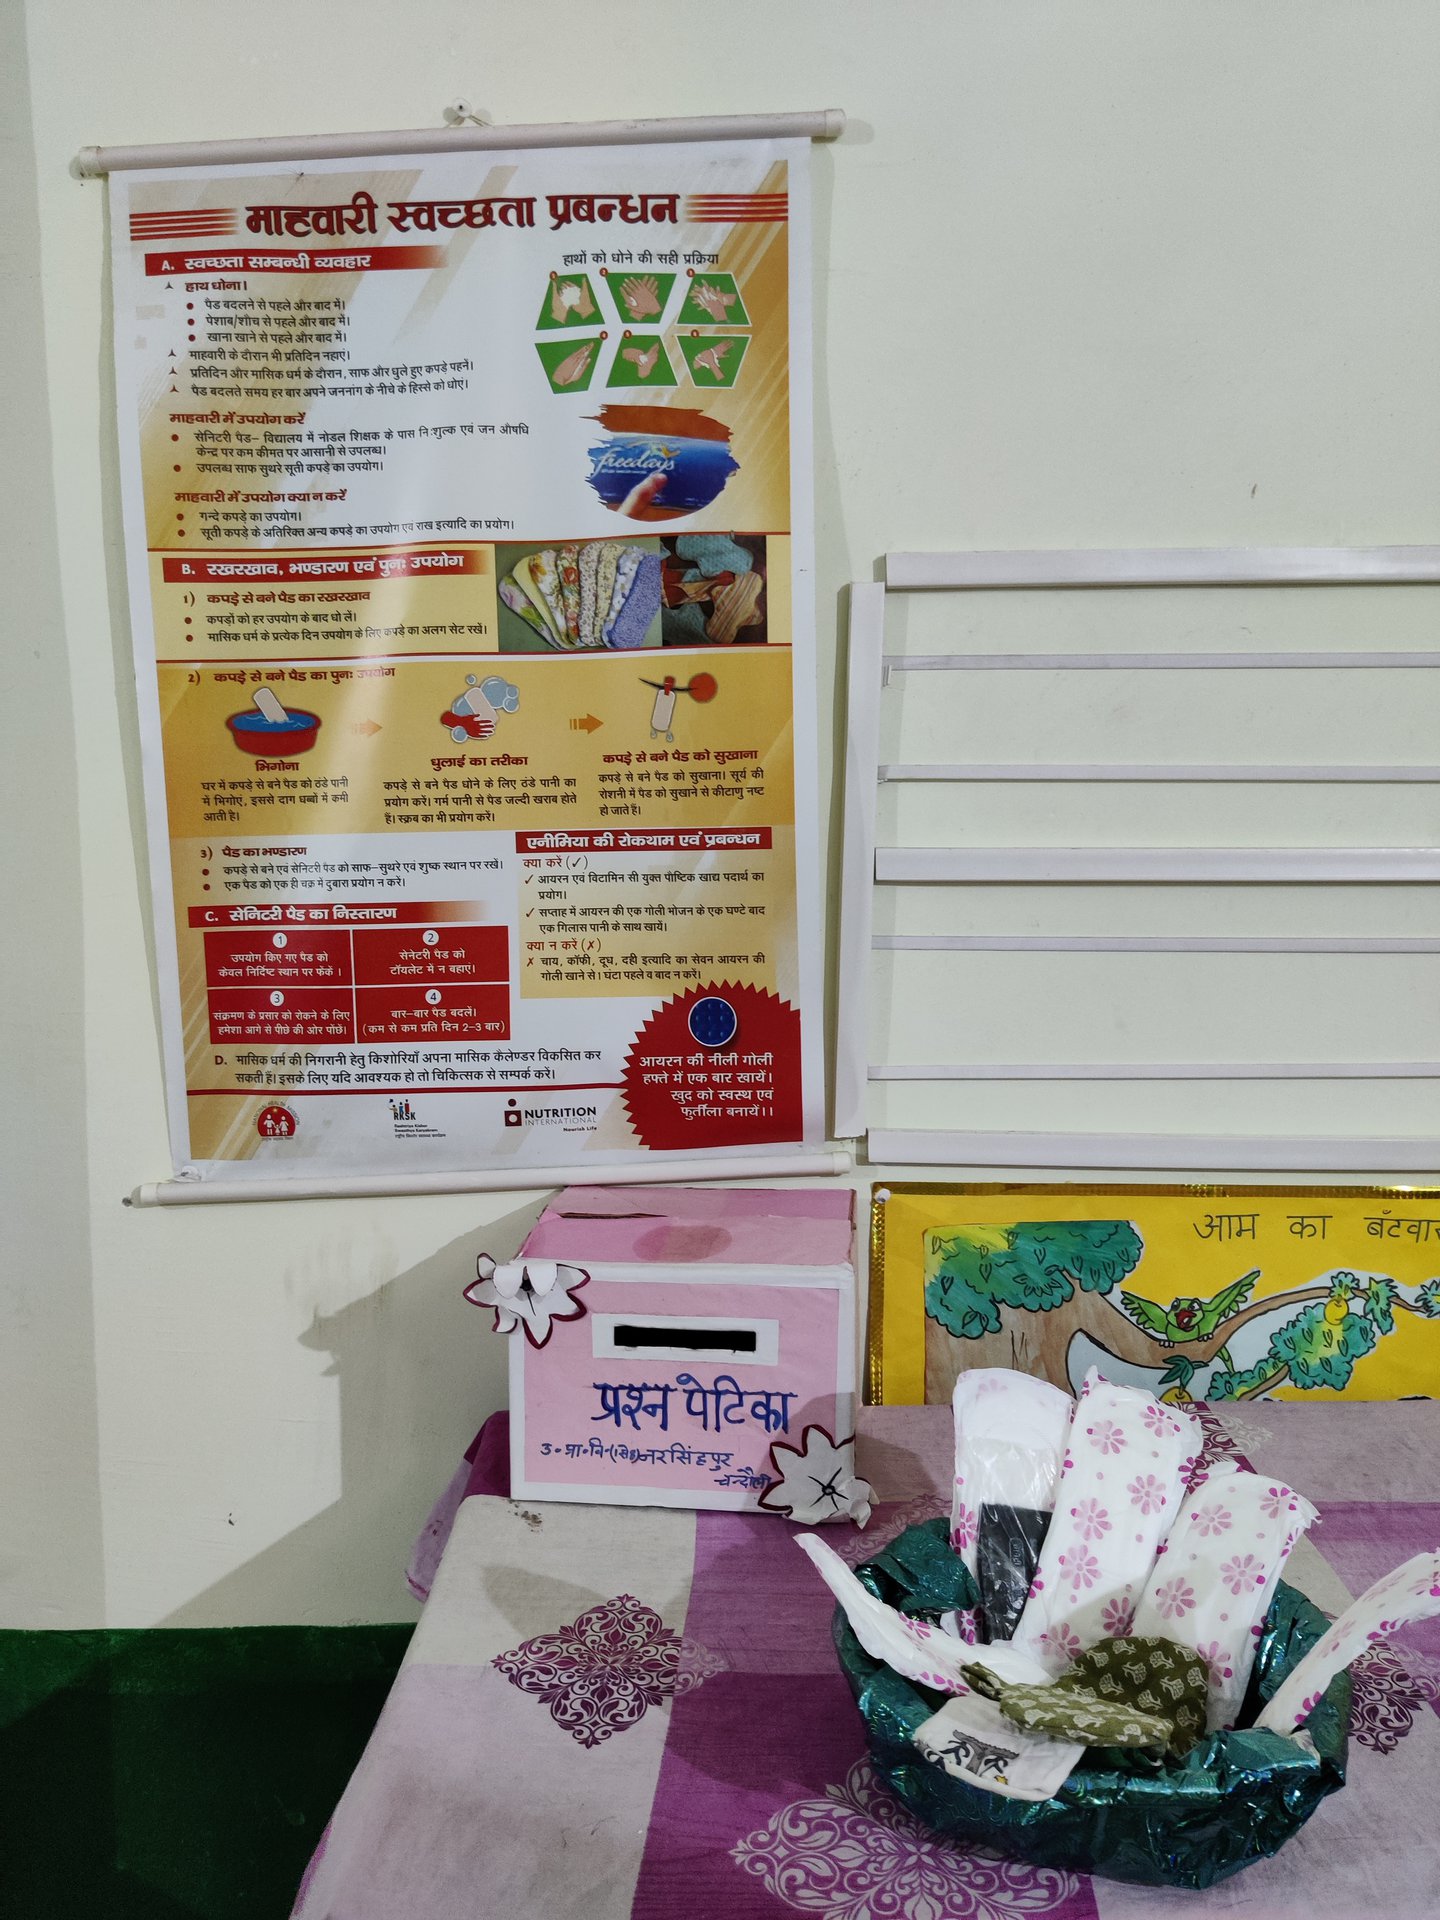 Menstrual hygiene pads are in a basic on a table in front of a poster that provided educational information about periods.